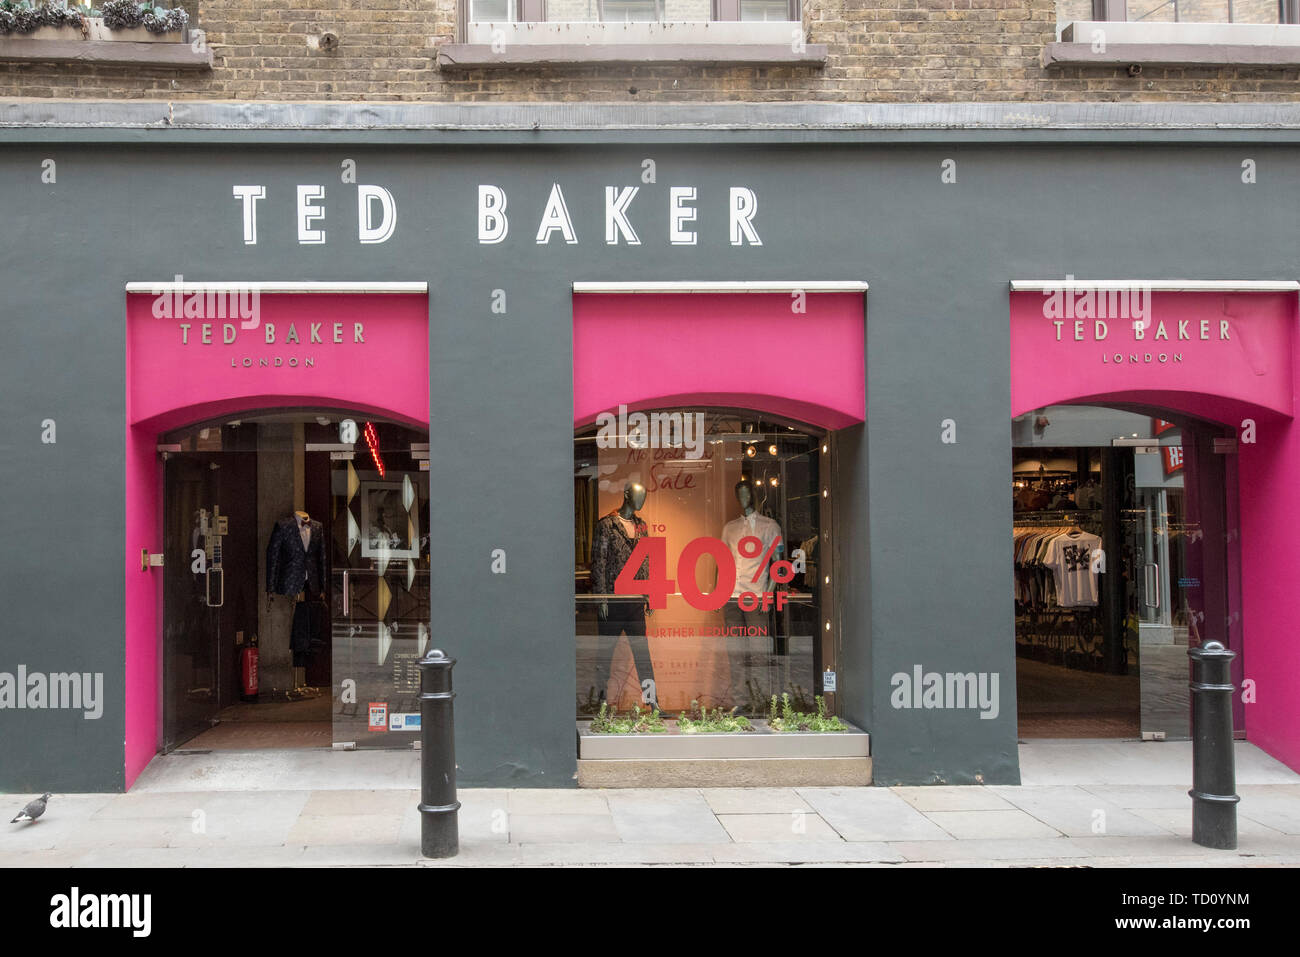 London, UK. 11 June 2019. The exterior of the Ted Baker clothing store in Covent  Garden. The company has issued a profit warning, expecting pretax profits  of £50m and £60m for the